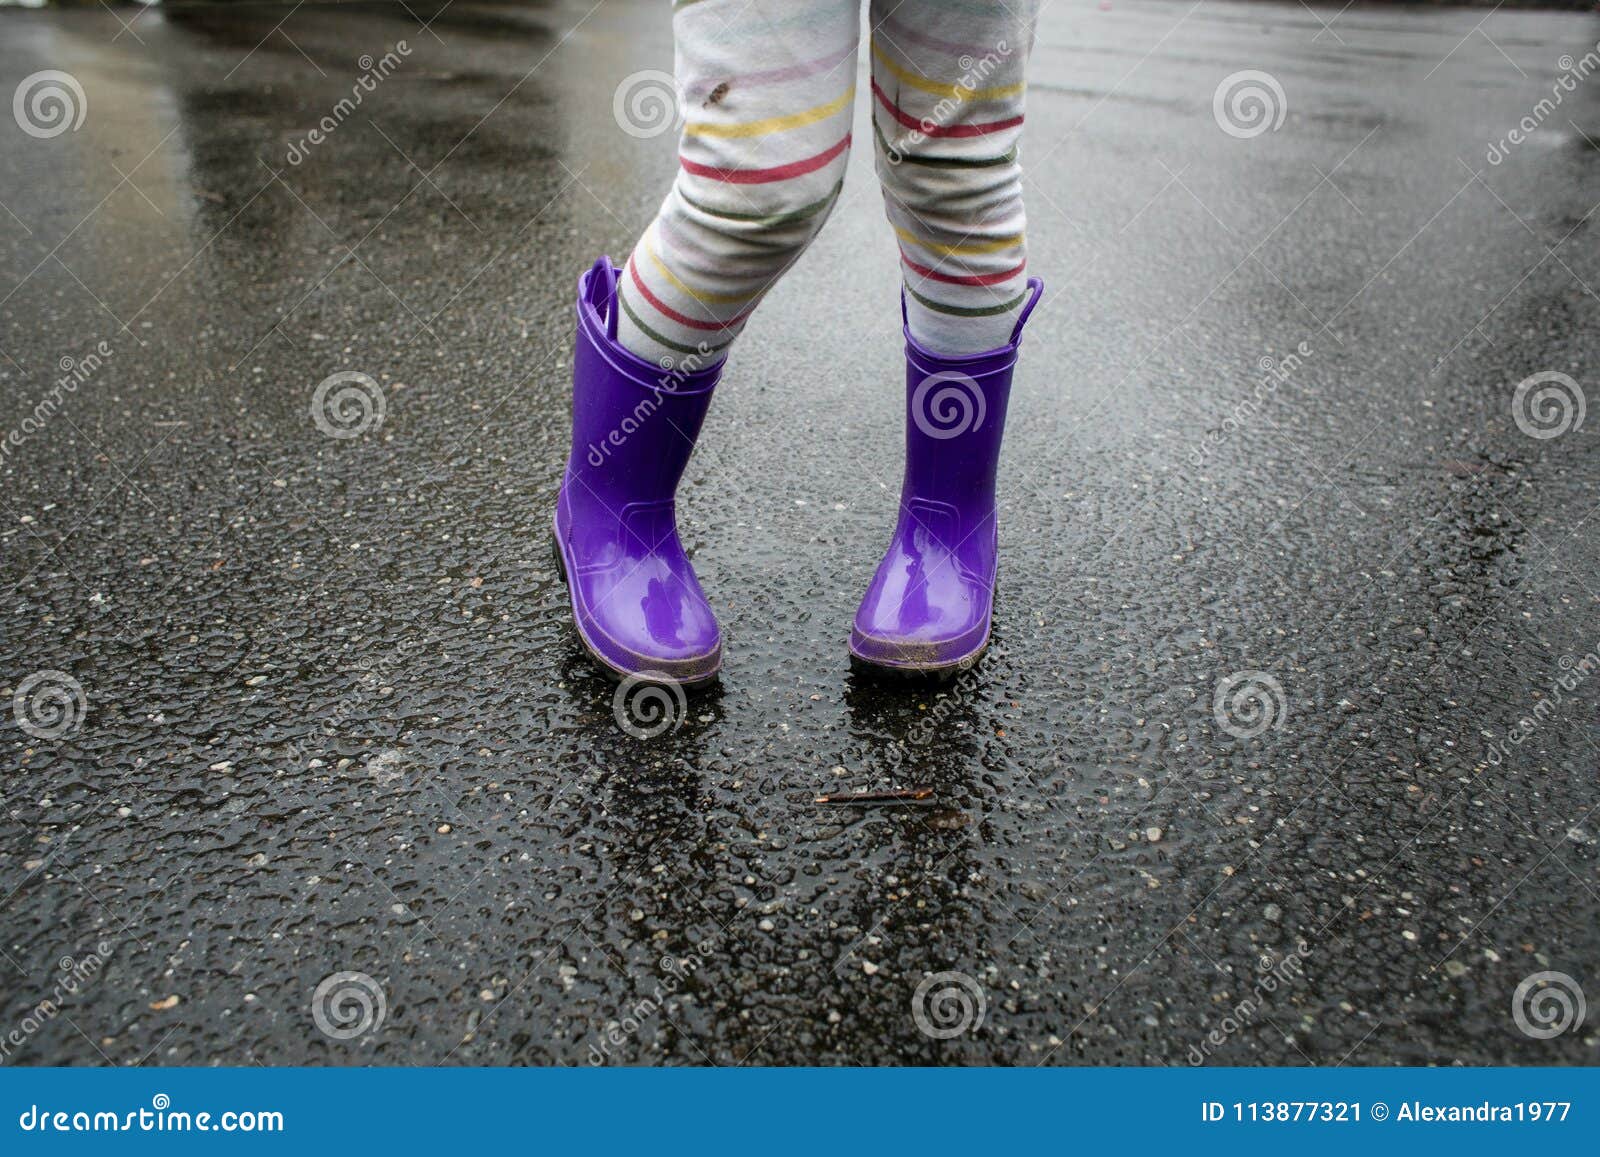 Girl in rain boots stock image. Image of path, girl - 113877321